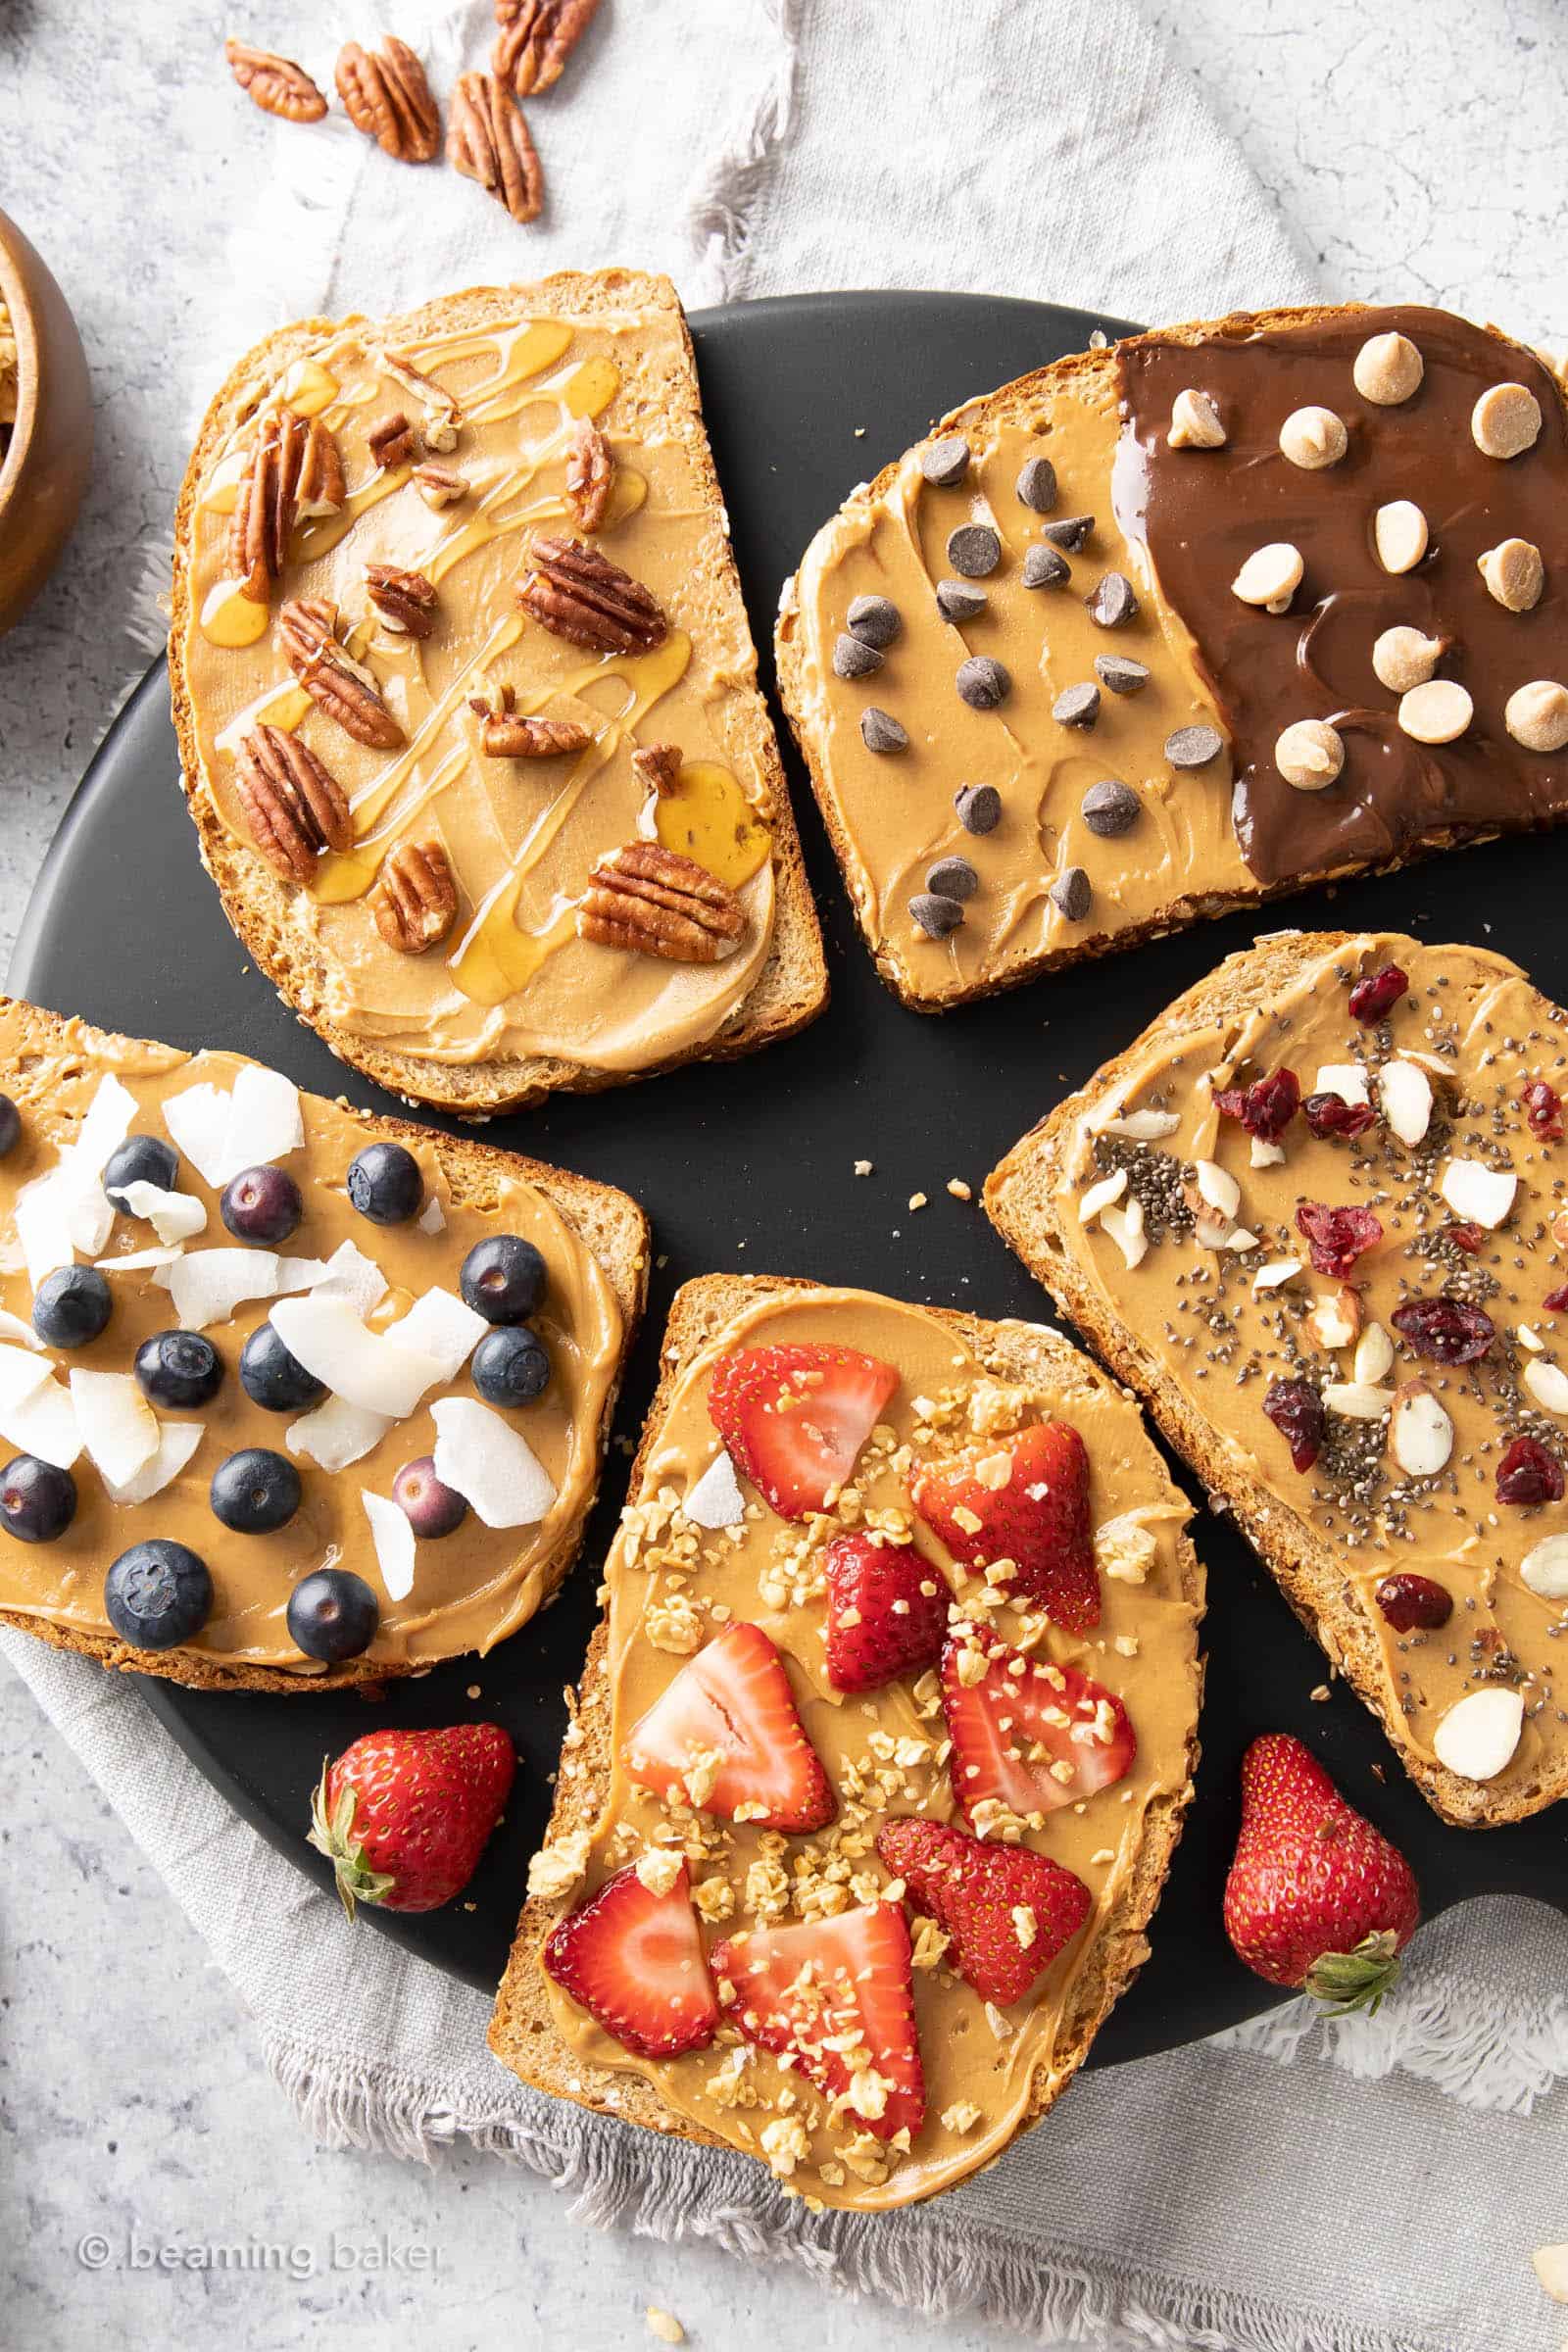 Slices of peanut butter toast covered in different toppings and spread